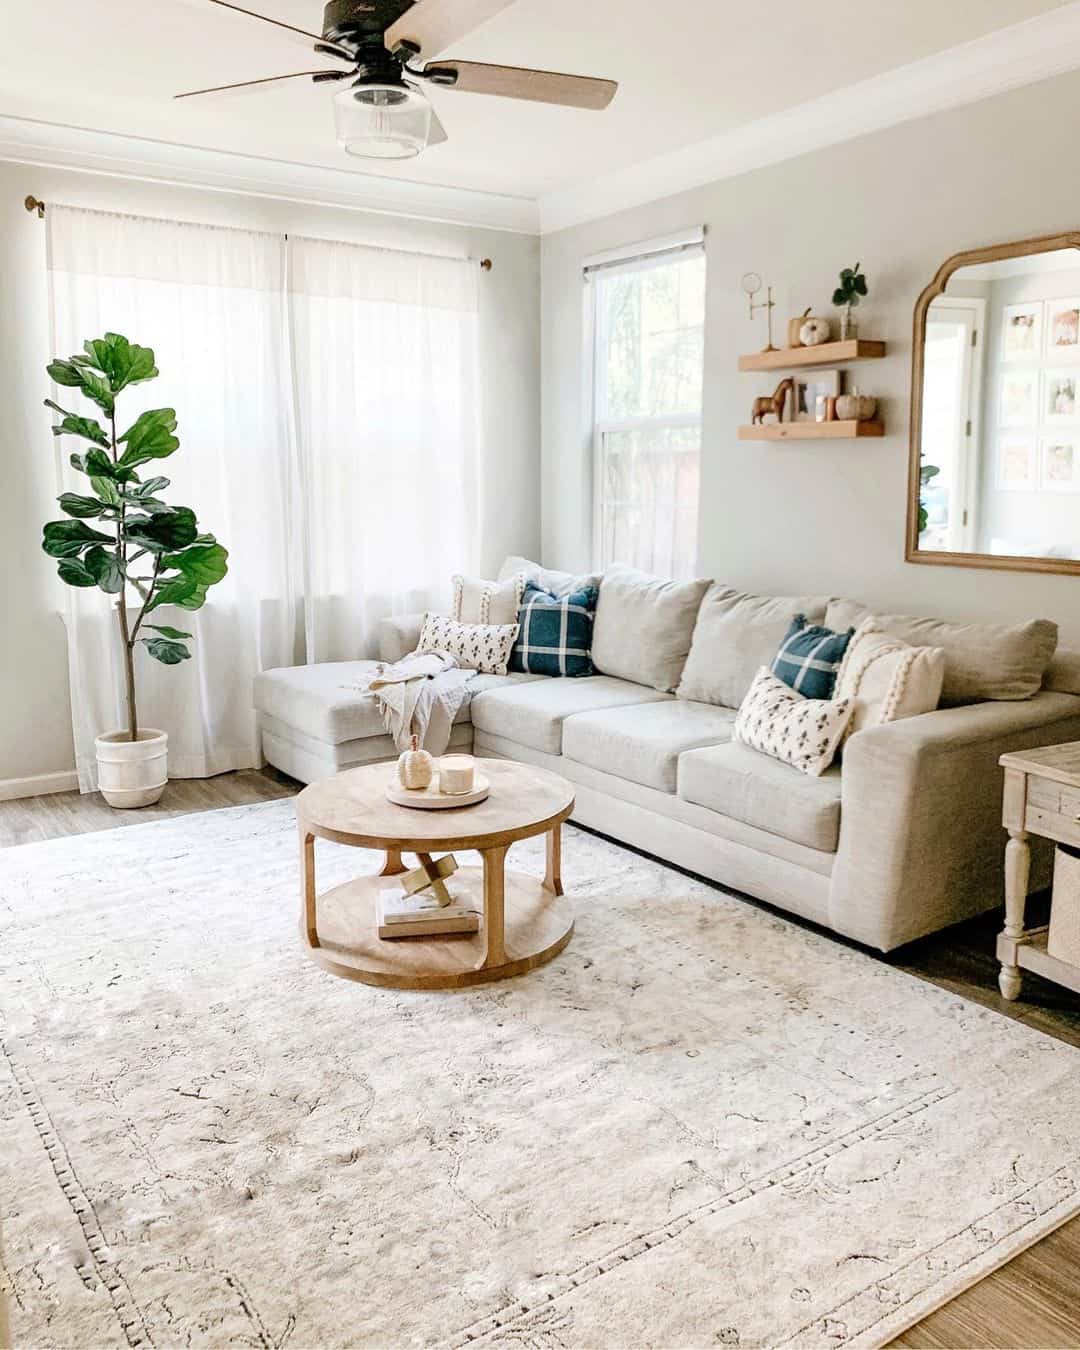 Beige Living Room with Natural Accessories - Soul & Lane